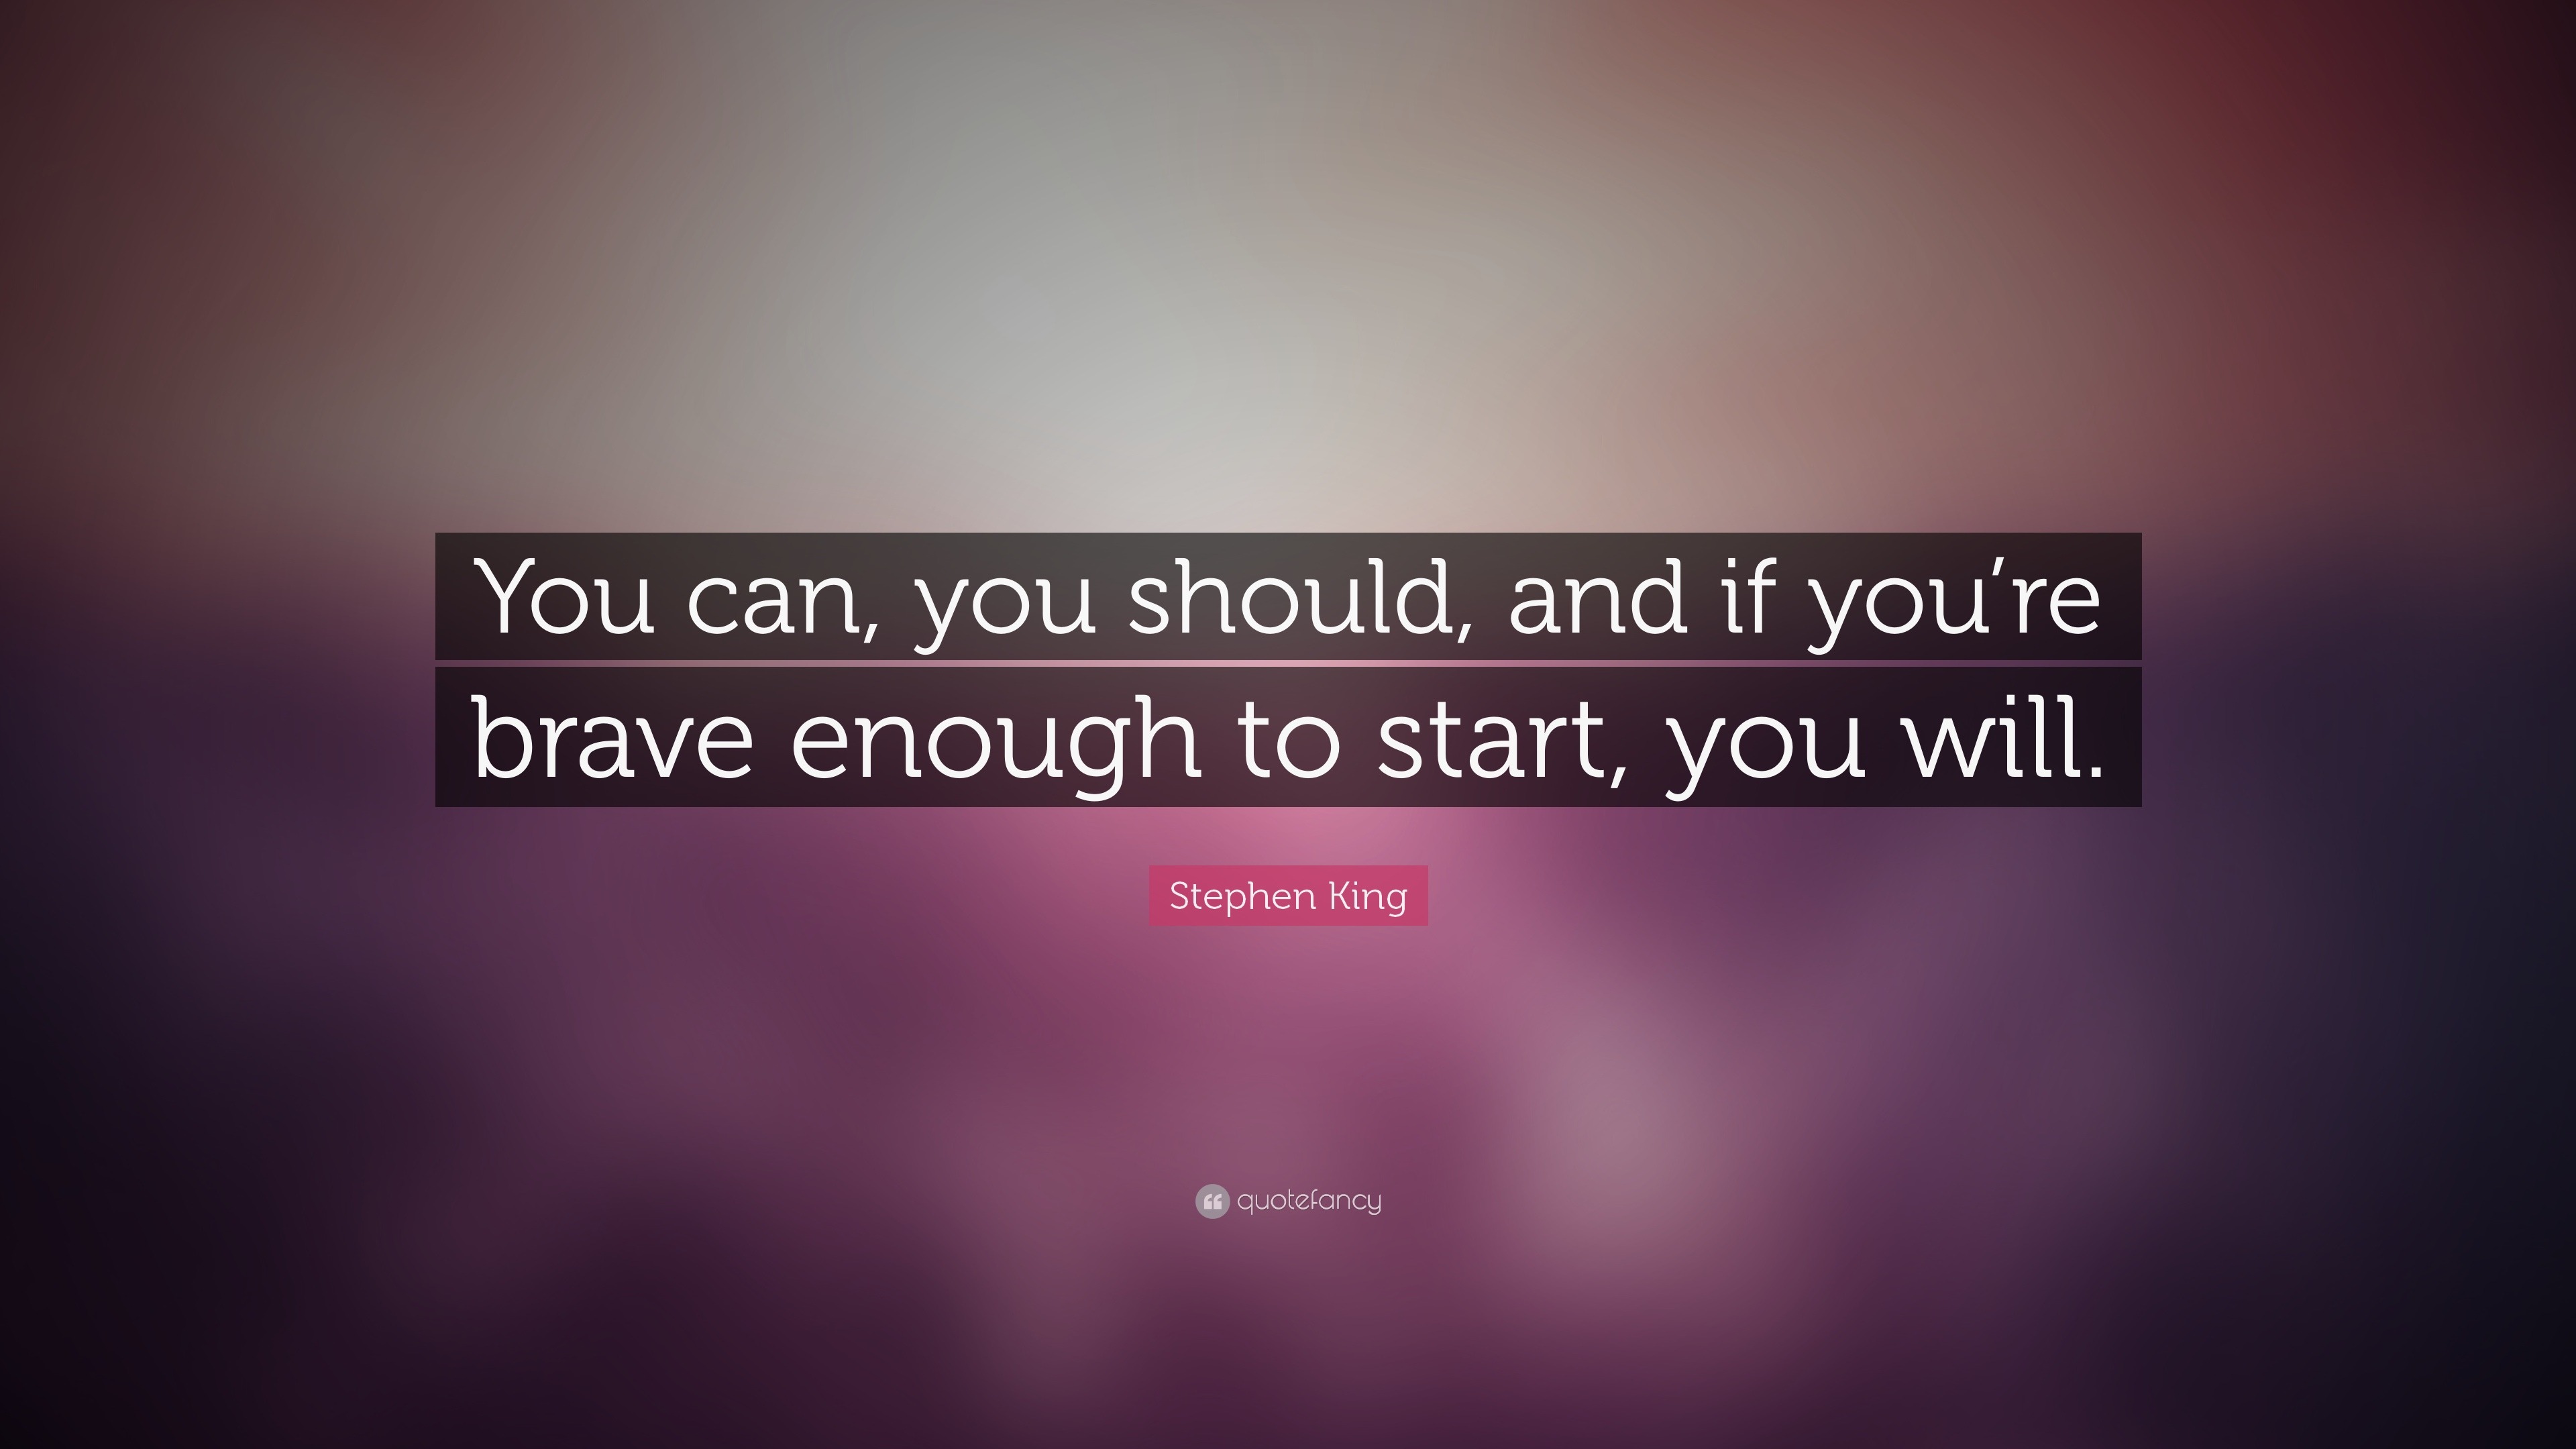 Stephen King Quote: “You can, you should, and if you’re brave enough to